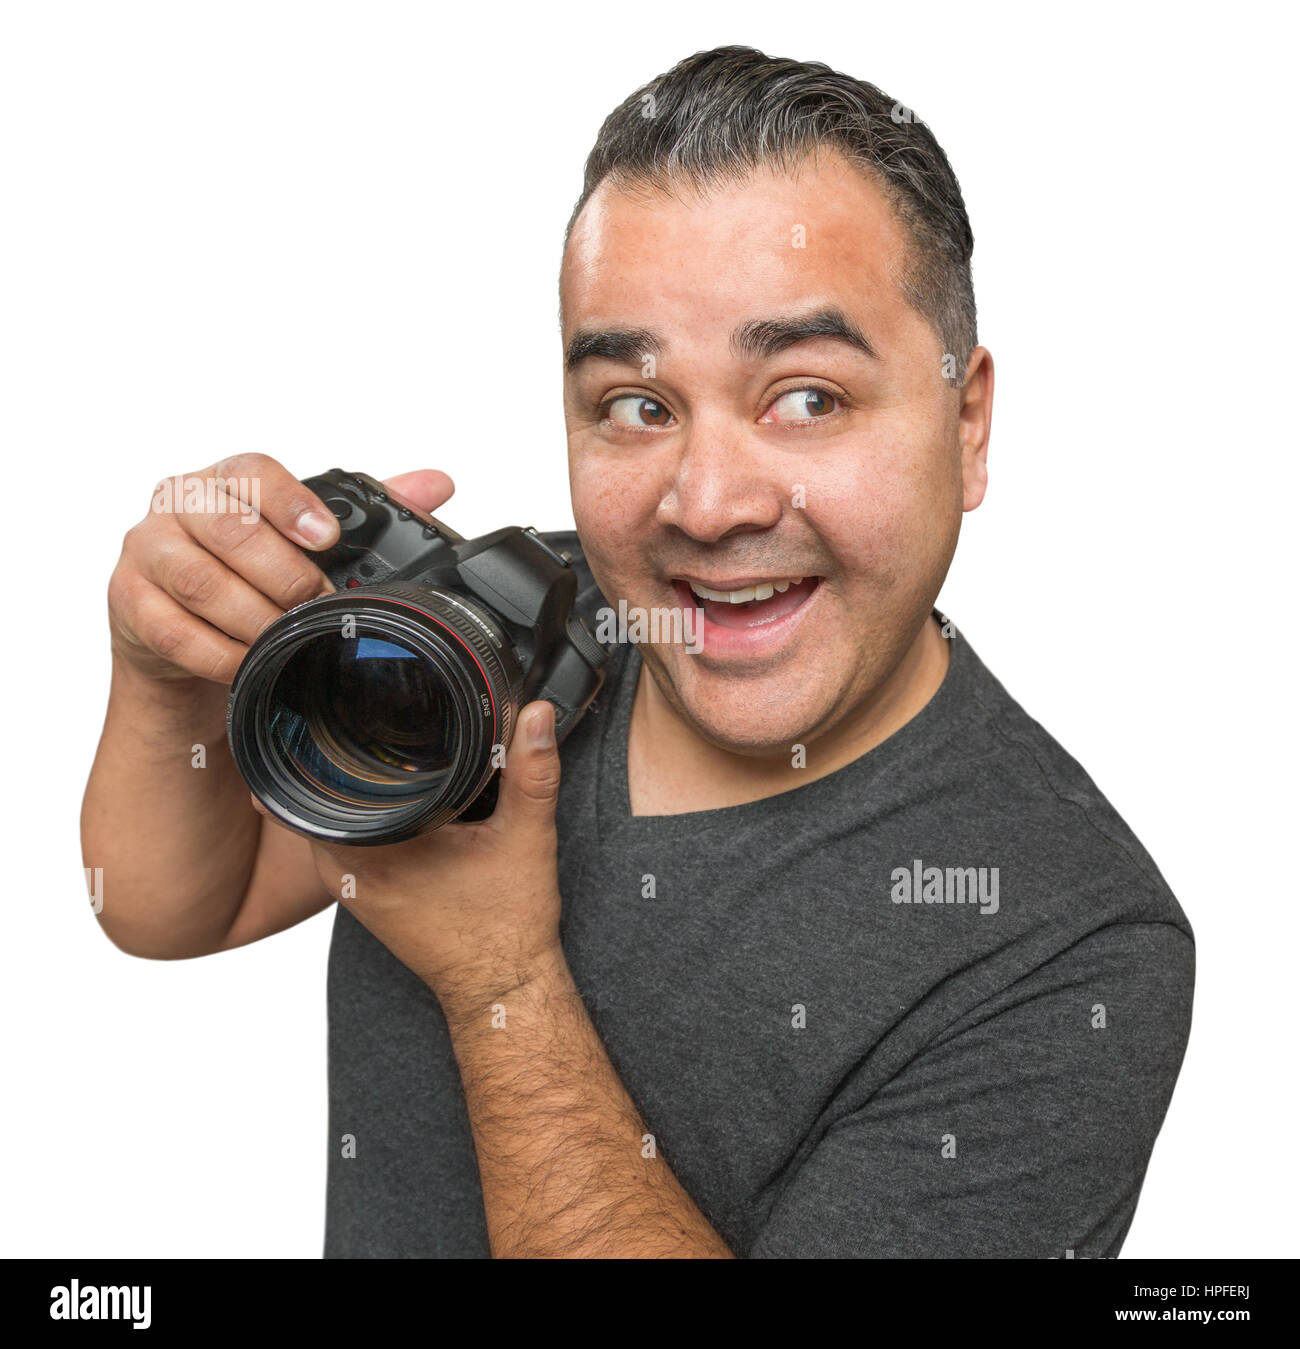 Goofy Hispanic Young Male With DSLR Camera Isolated on a White Background. Stock Photo